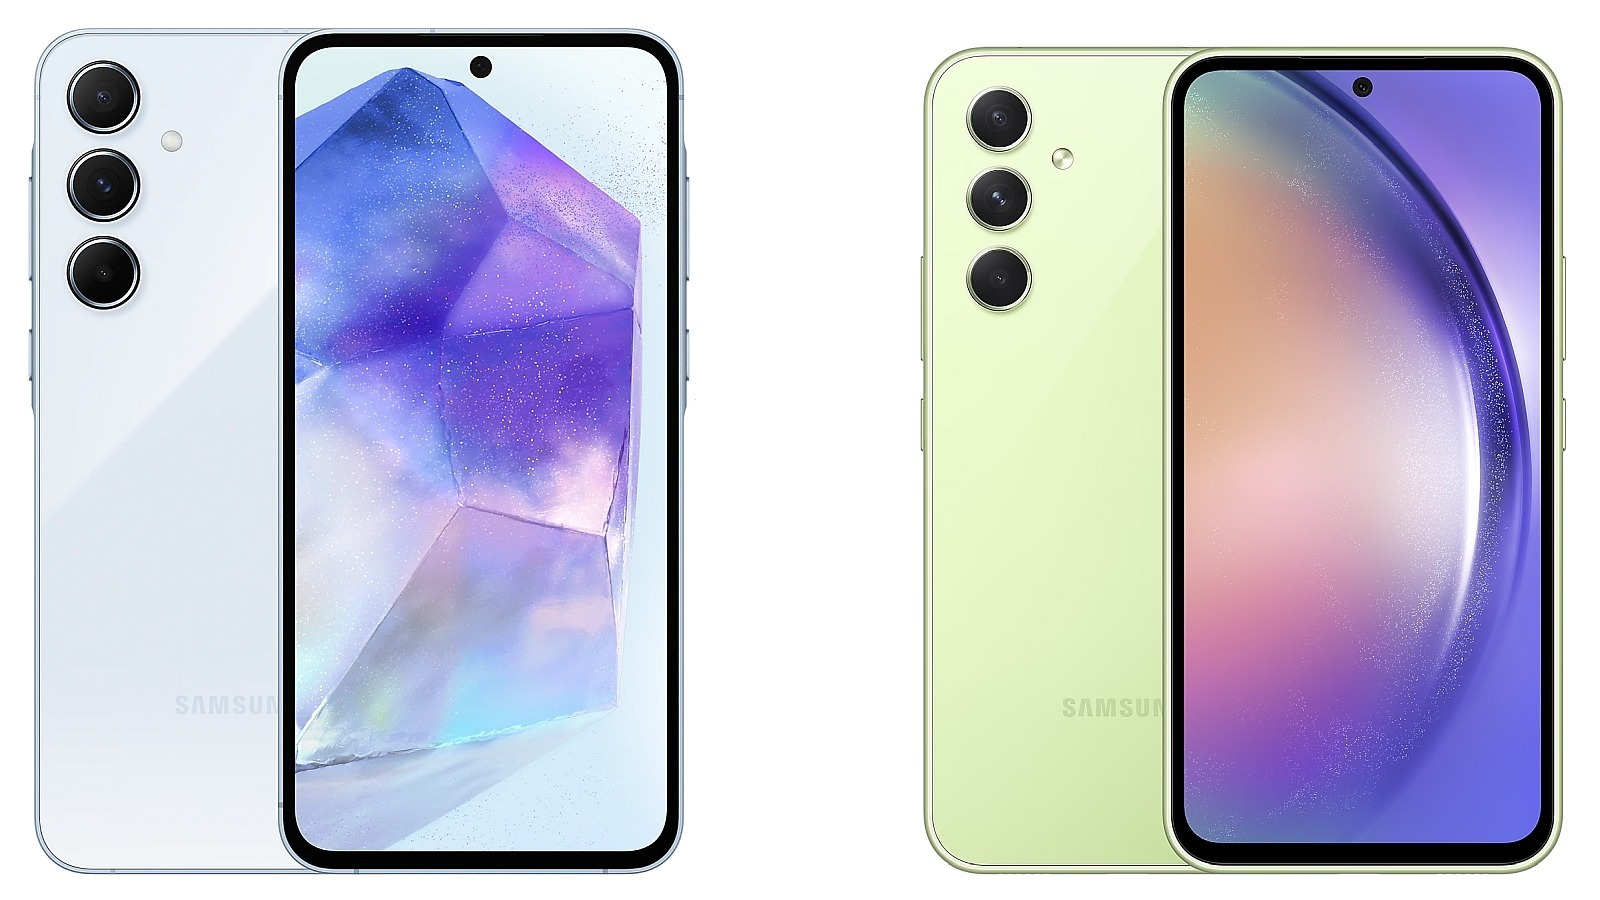 Samsung Galaxy A55 Vs. A54: What's The Difference Between These Phone
Models?